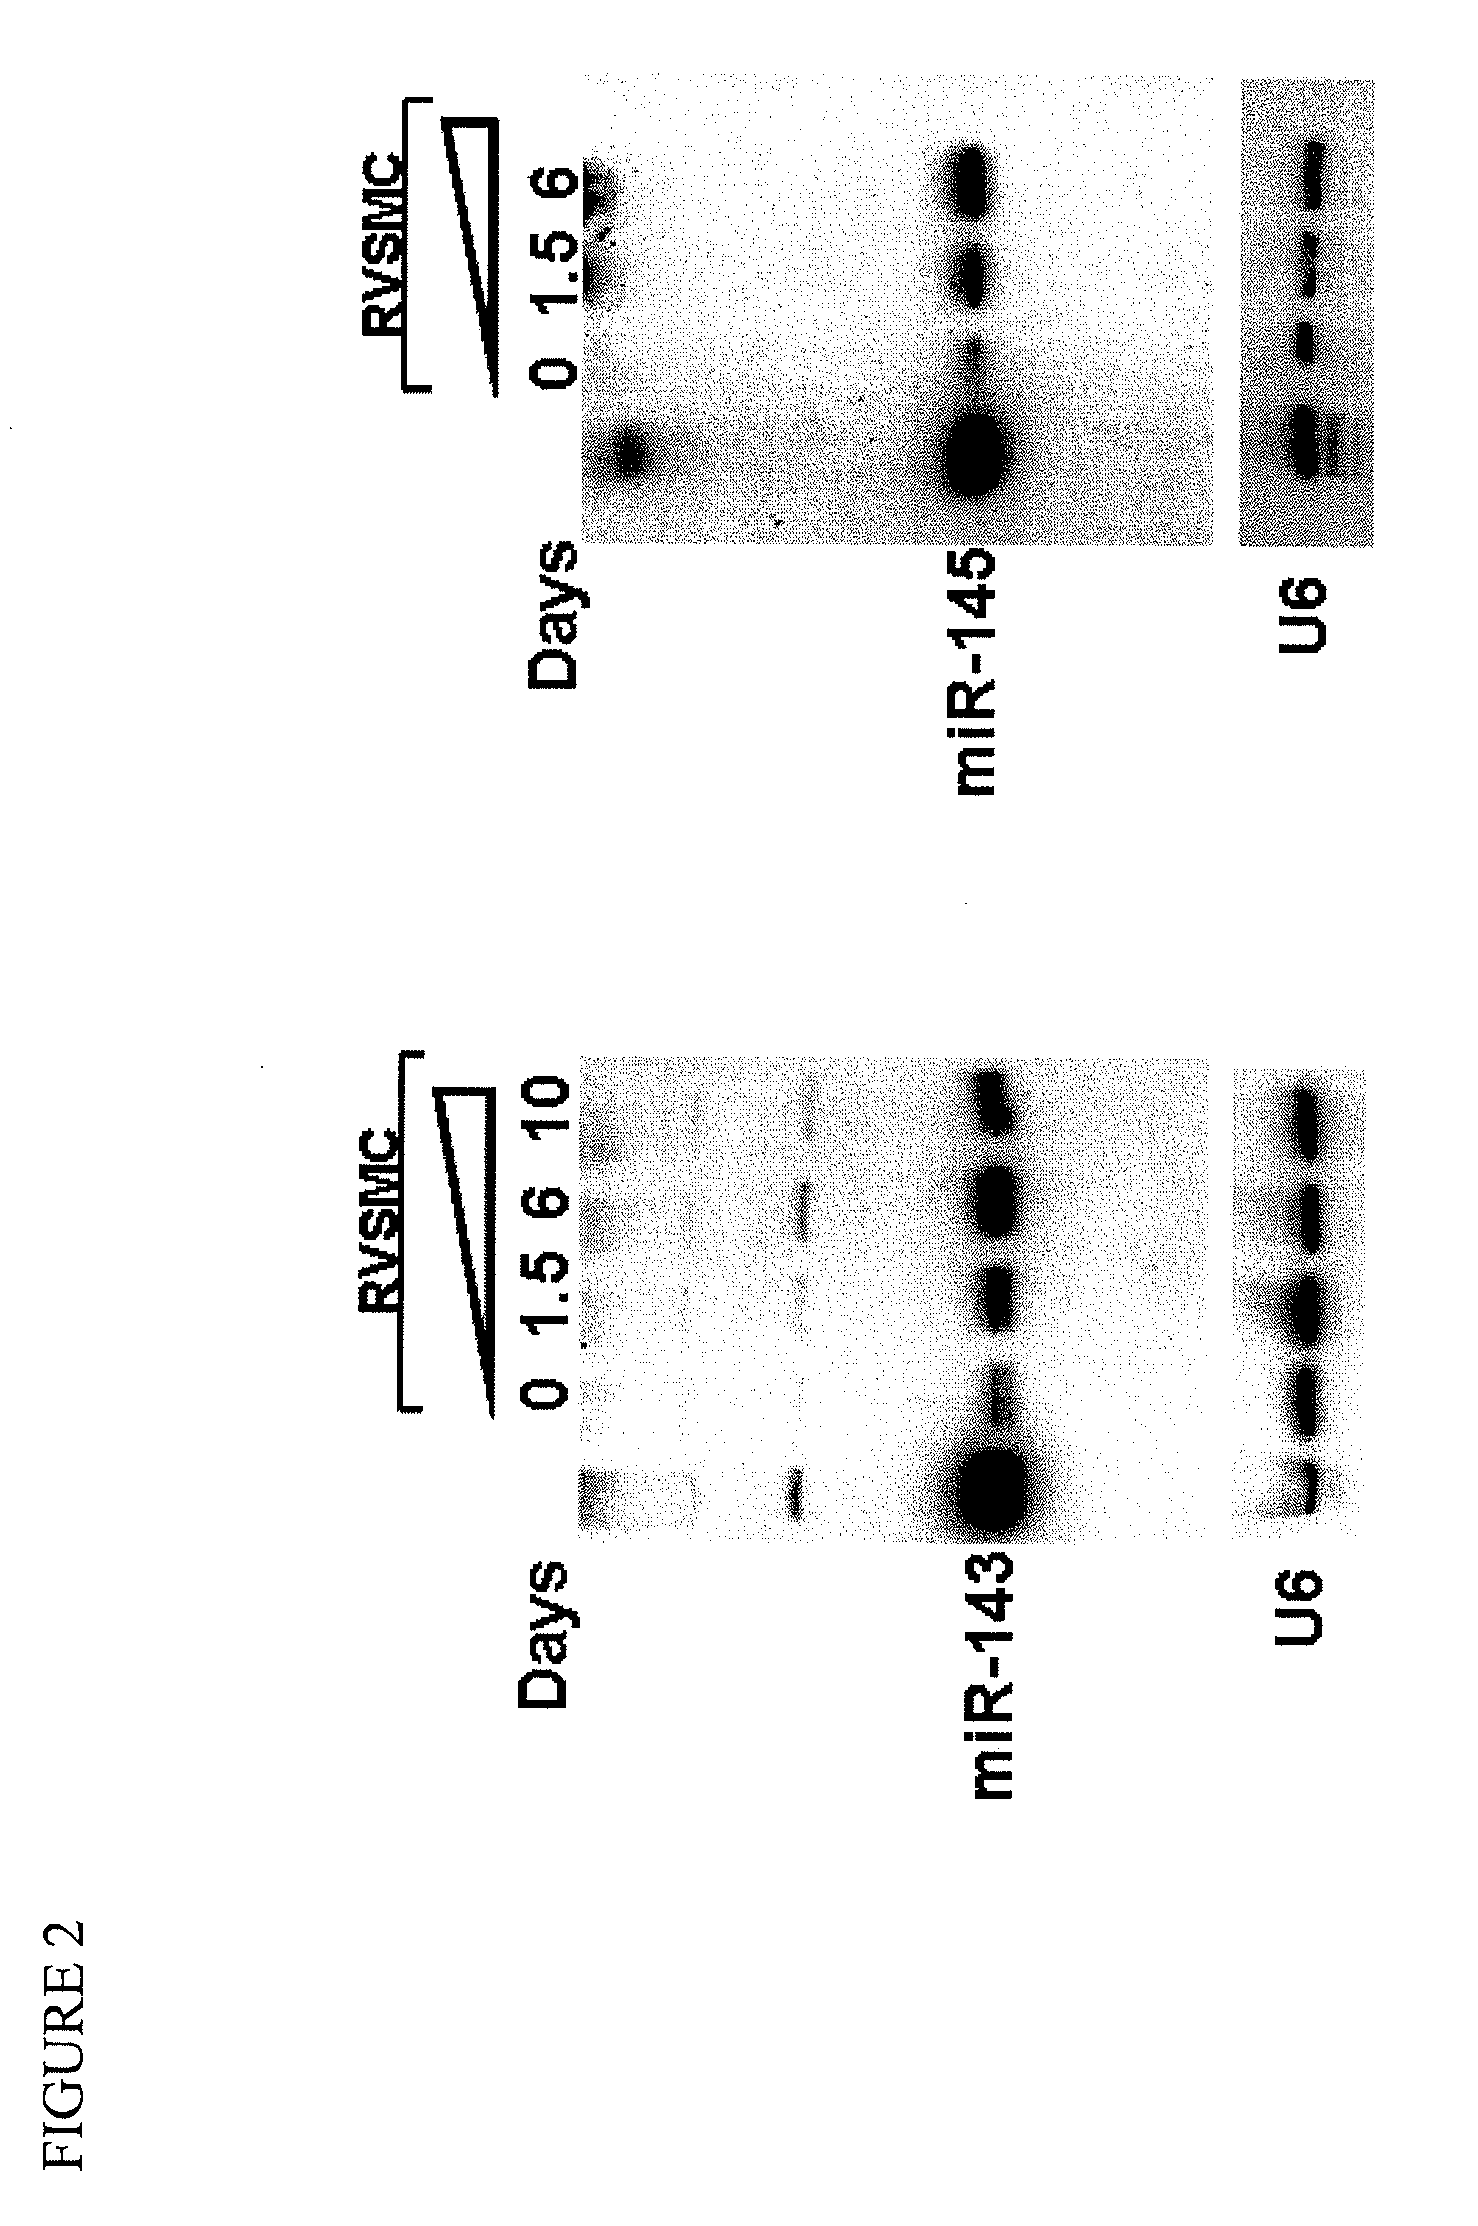 MICRO-RNAs THAT MODULATE SMOOTH MUSCLE PROLIFERATION AND DIFFERENTIATION AND USES THEREOF